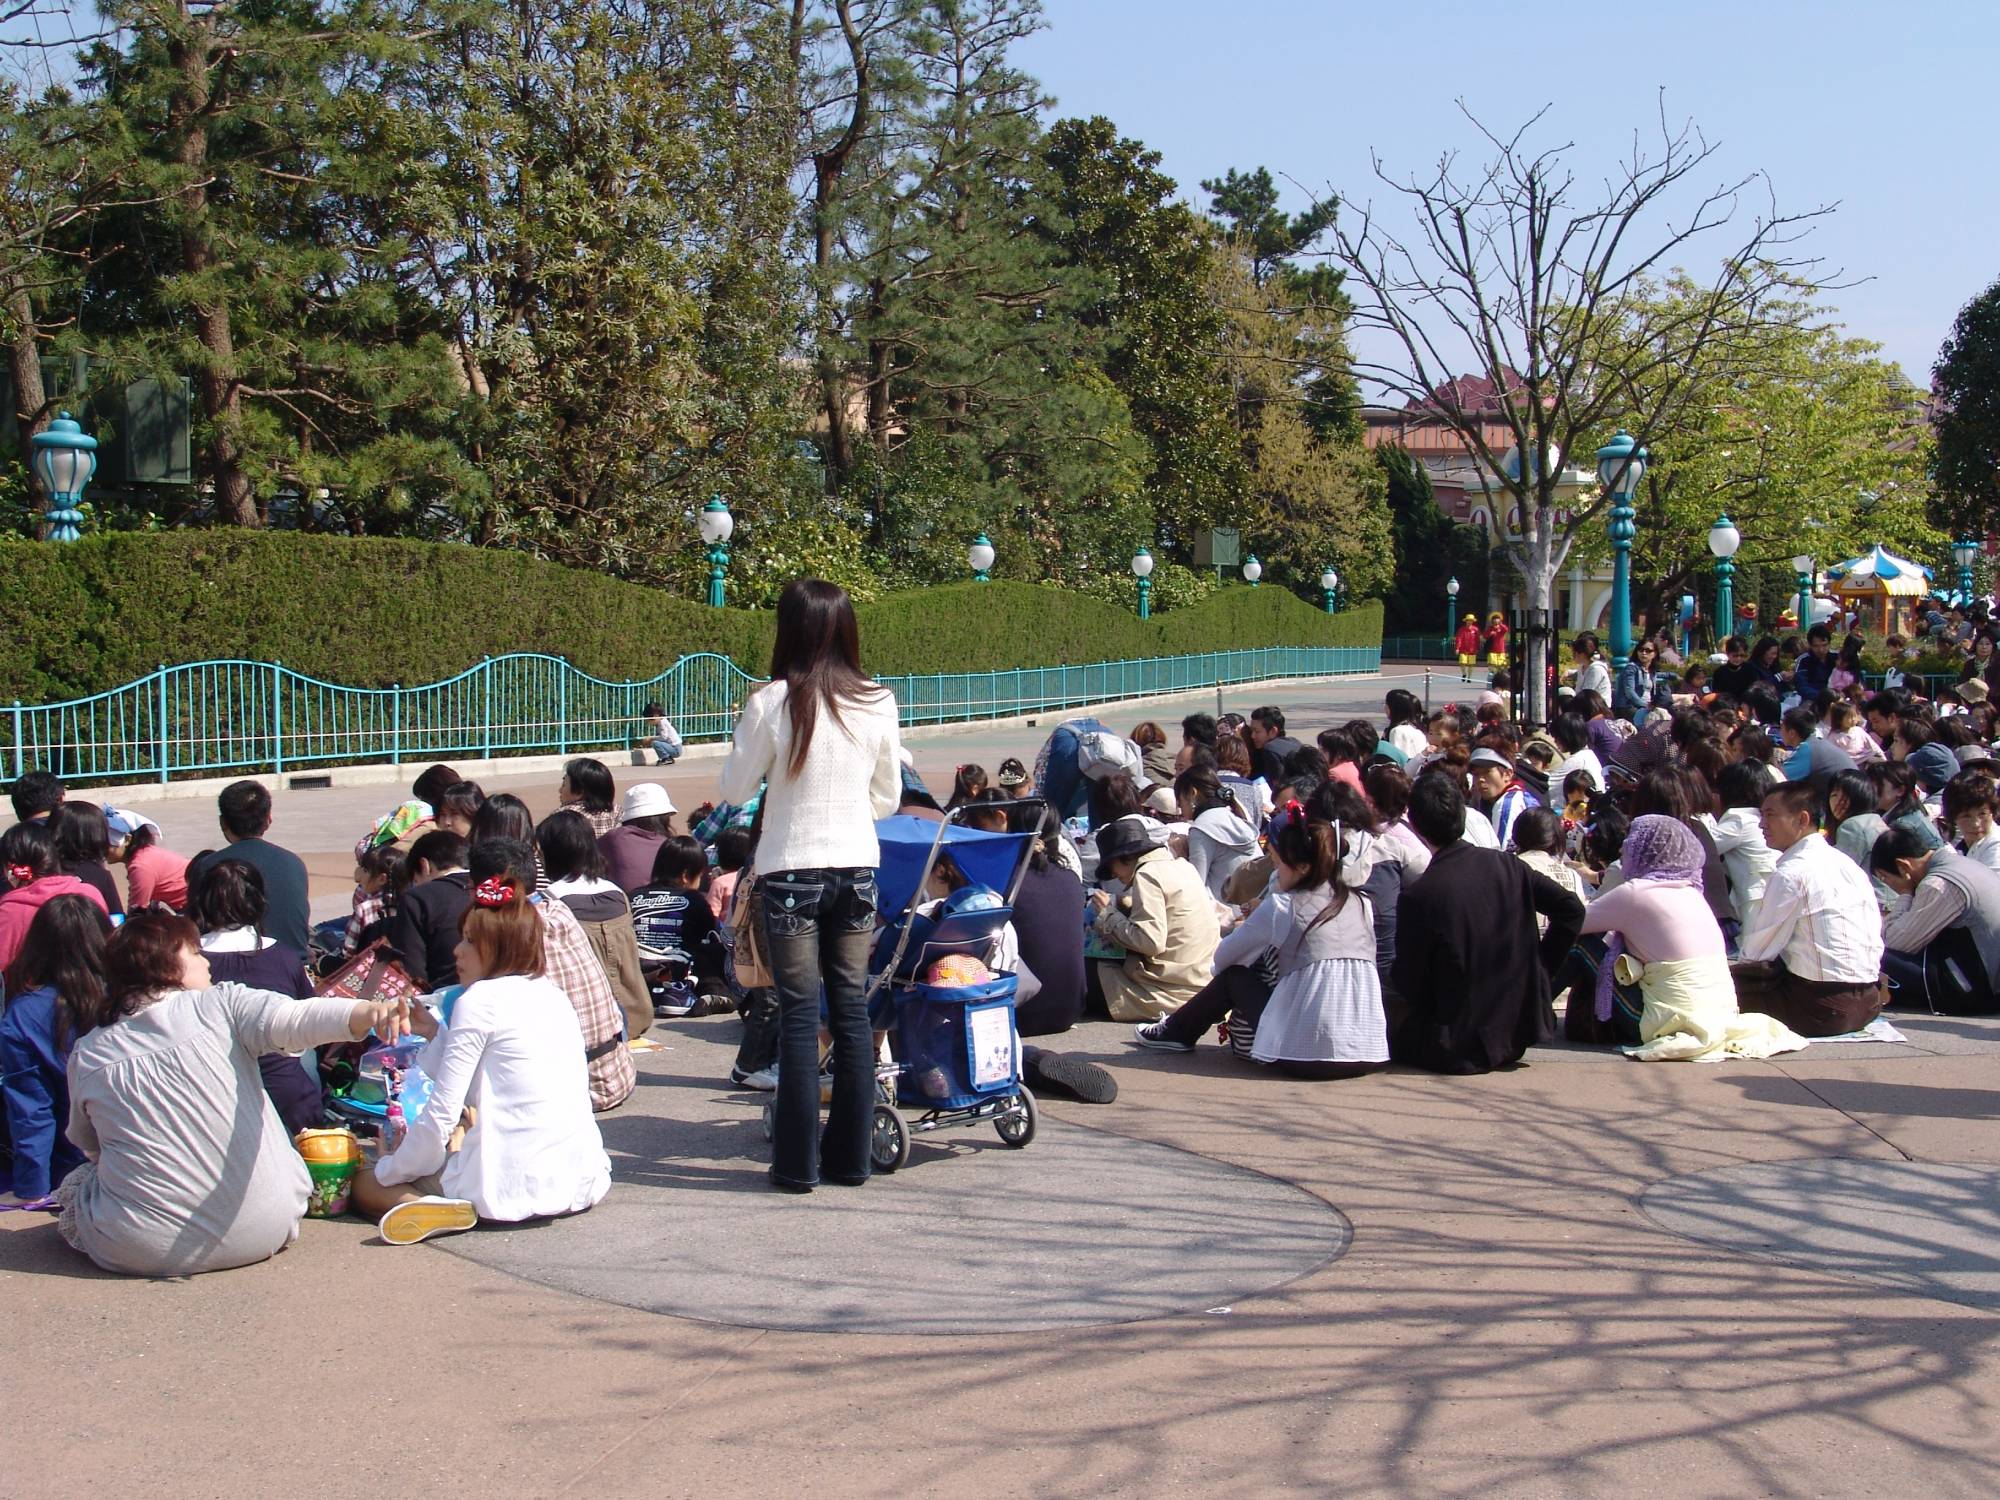 Tokyo Disneyland - waiting for the afternoon parade